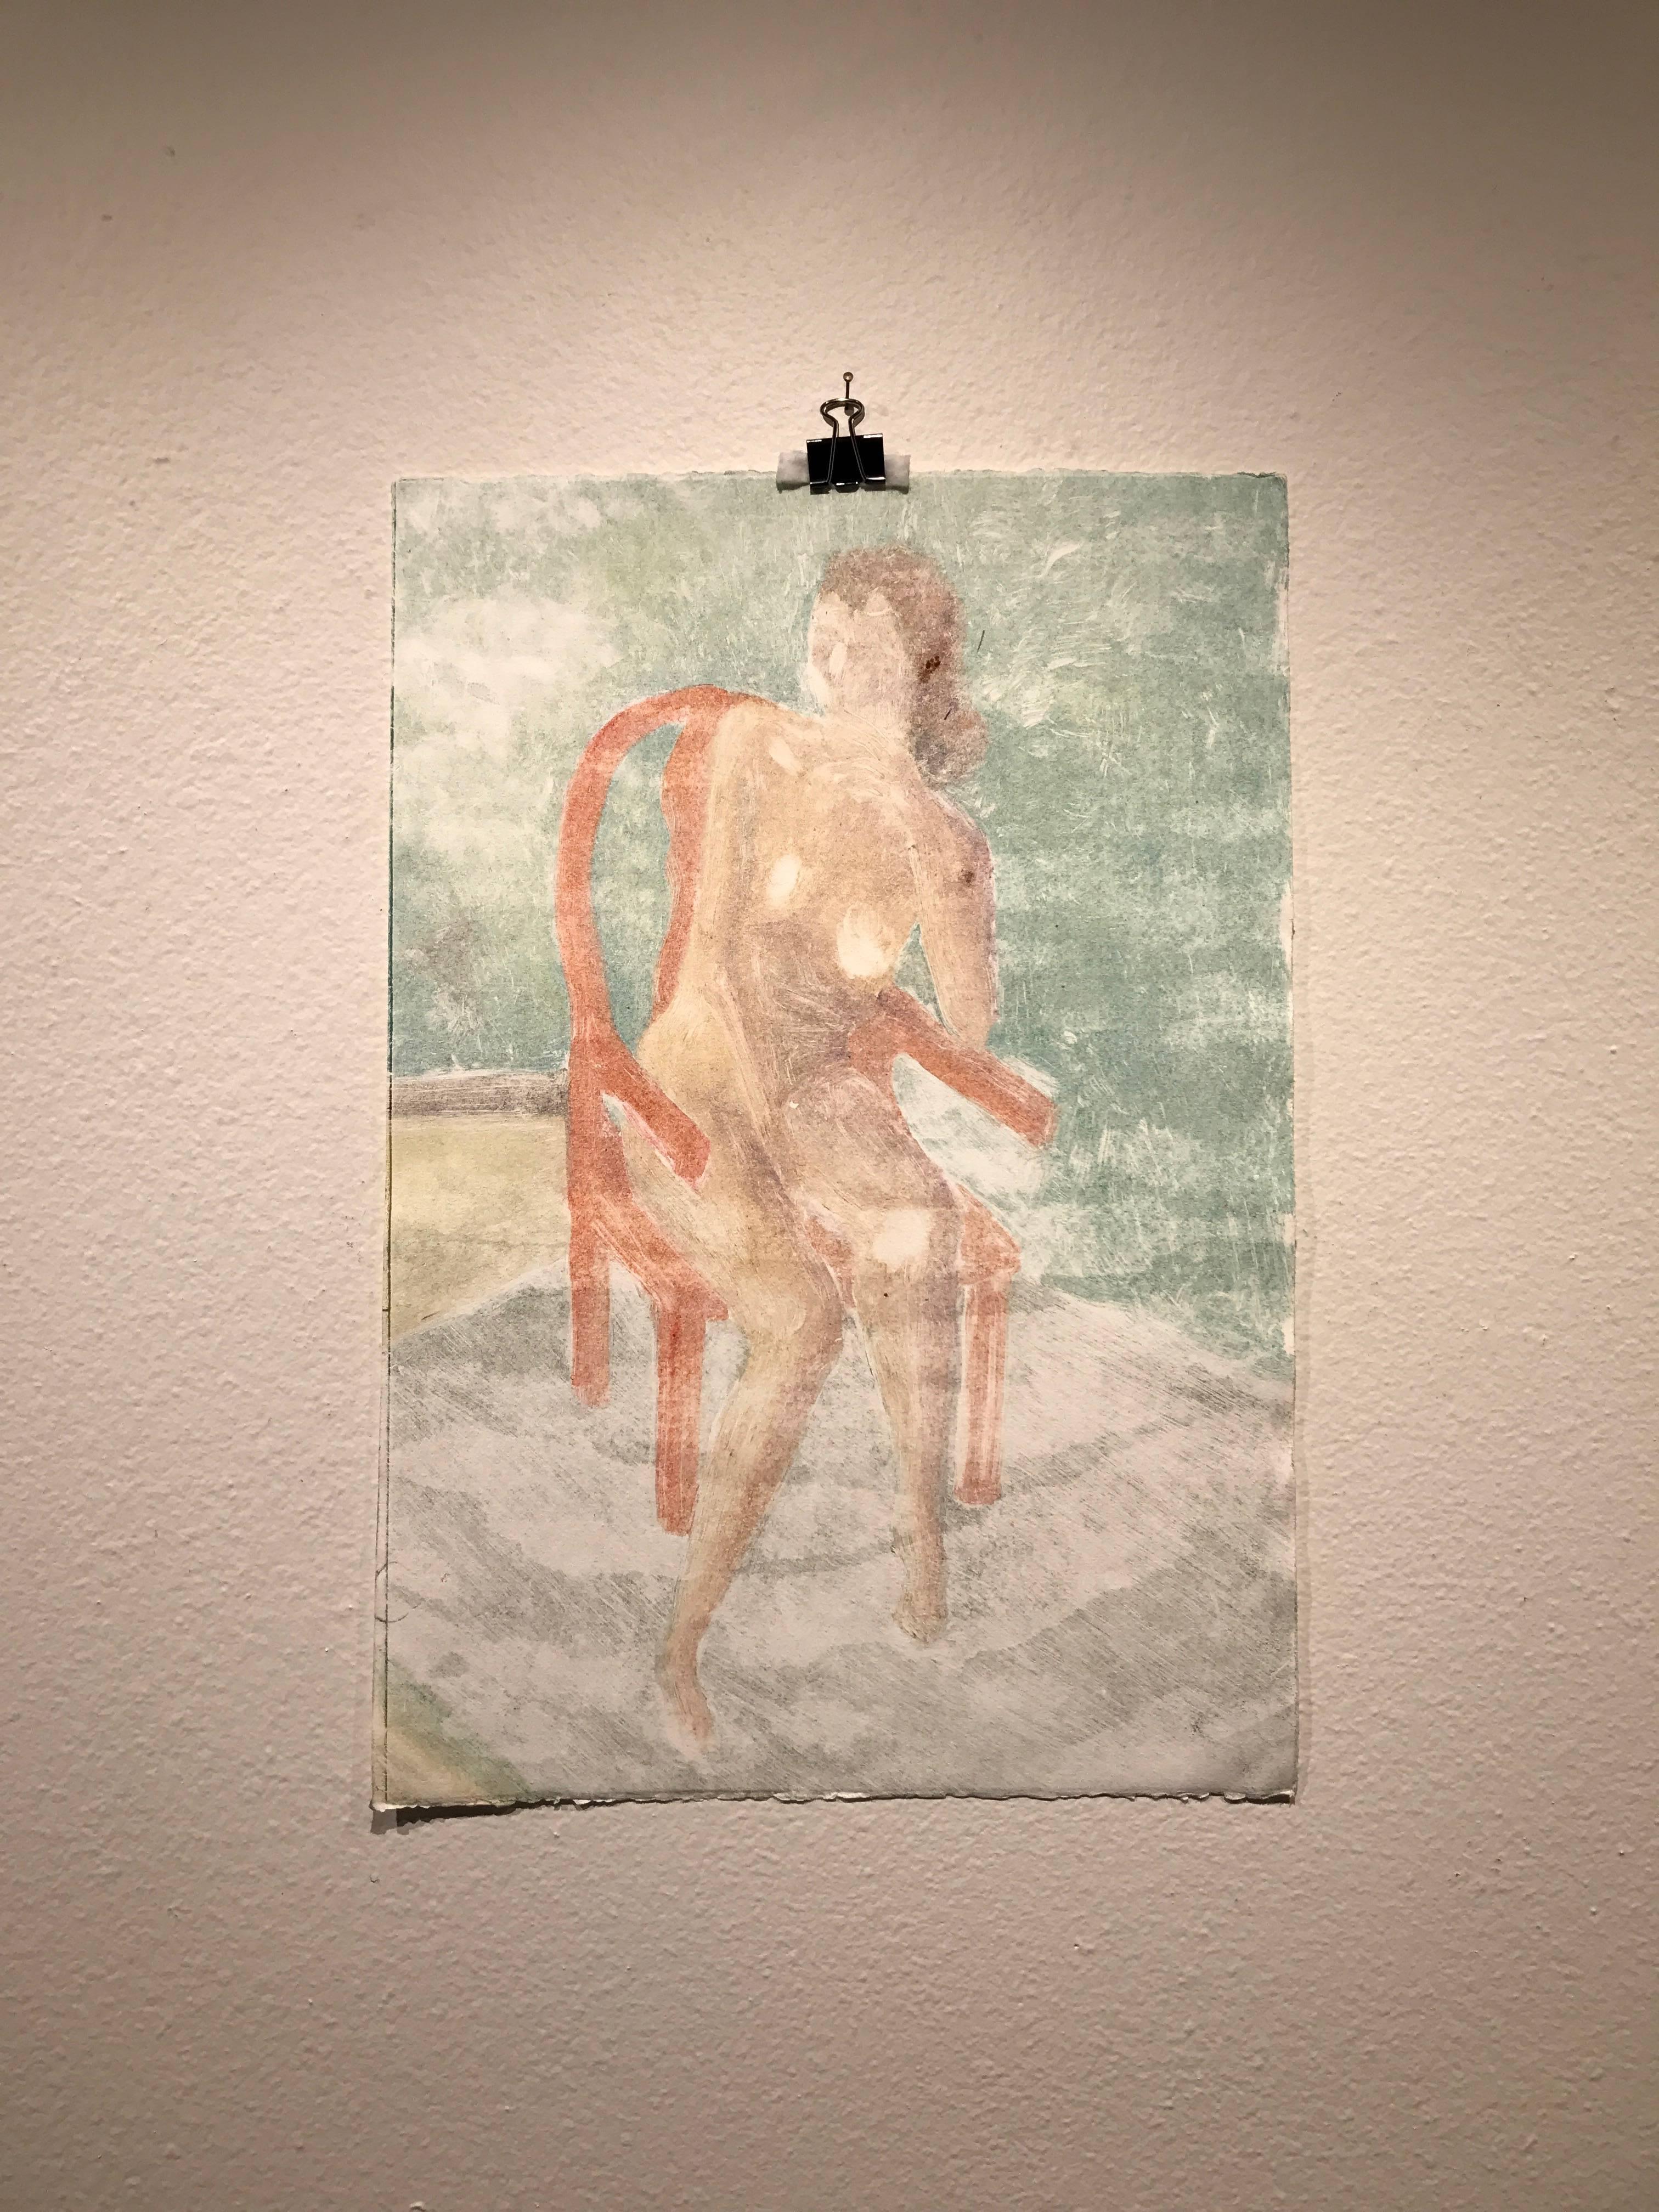 Ghost of Nude Sunning on Porch - Print by Carolyn Young